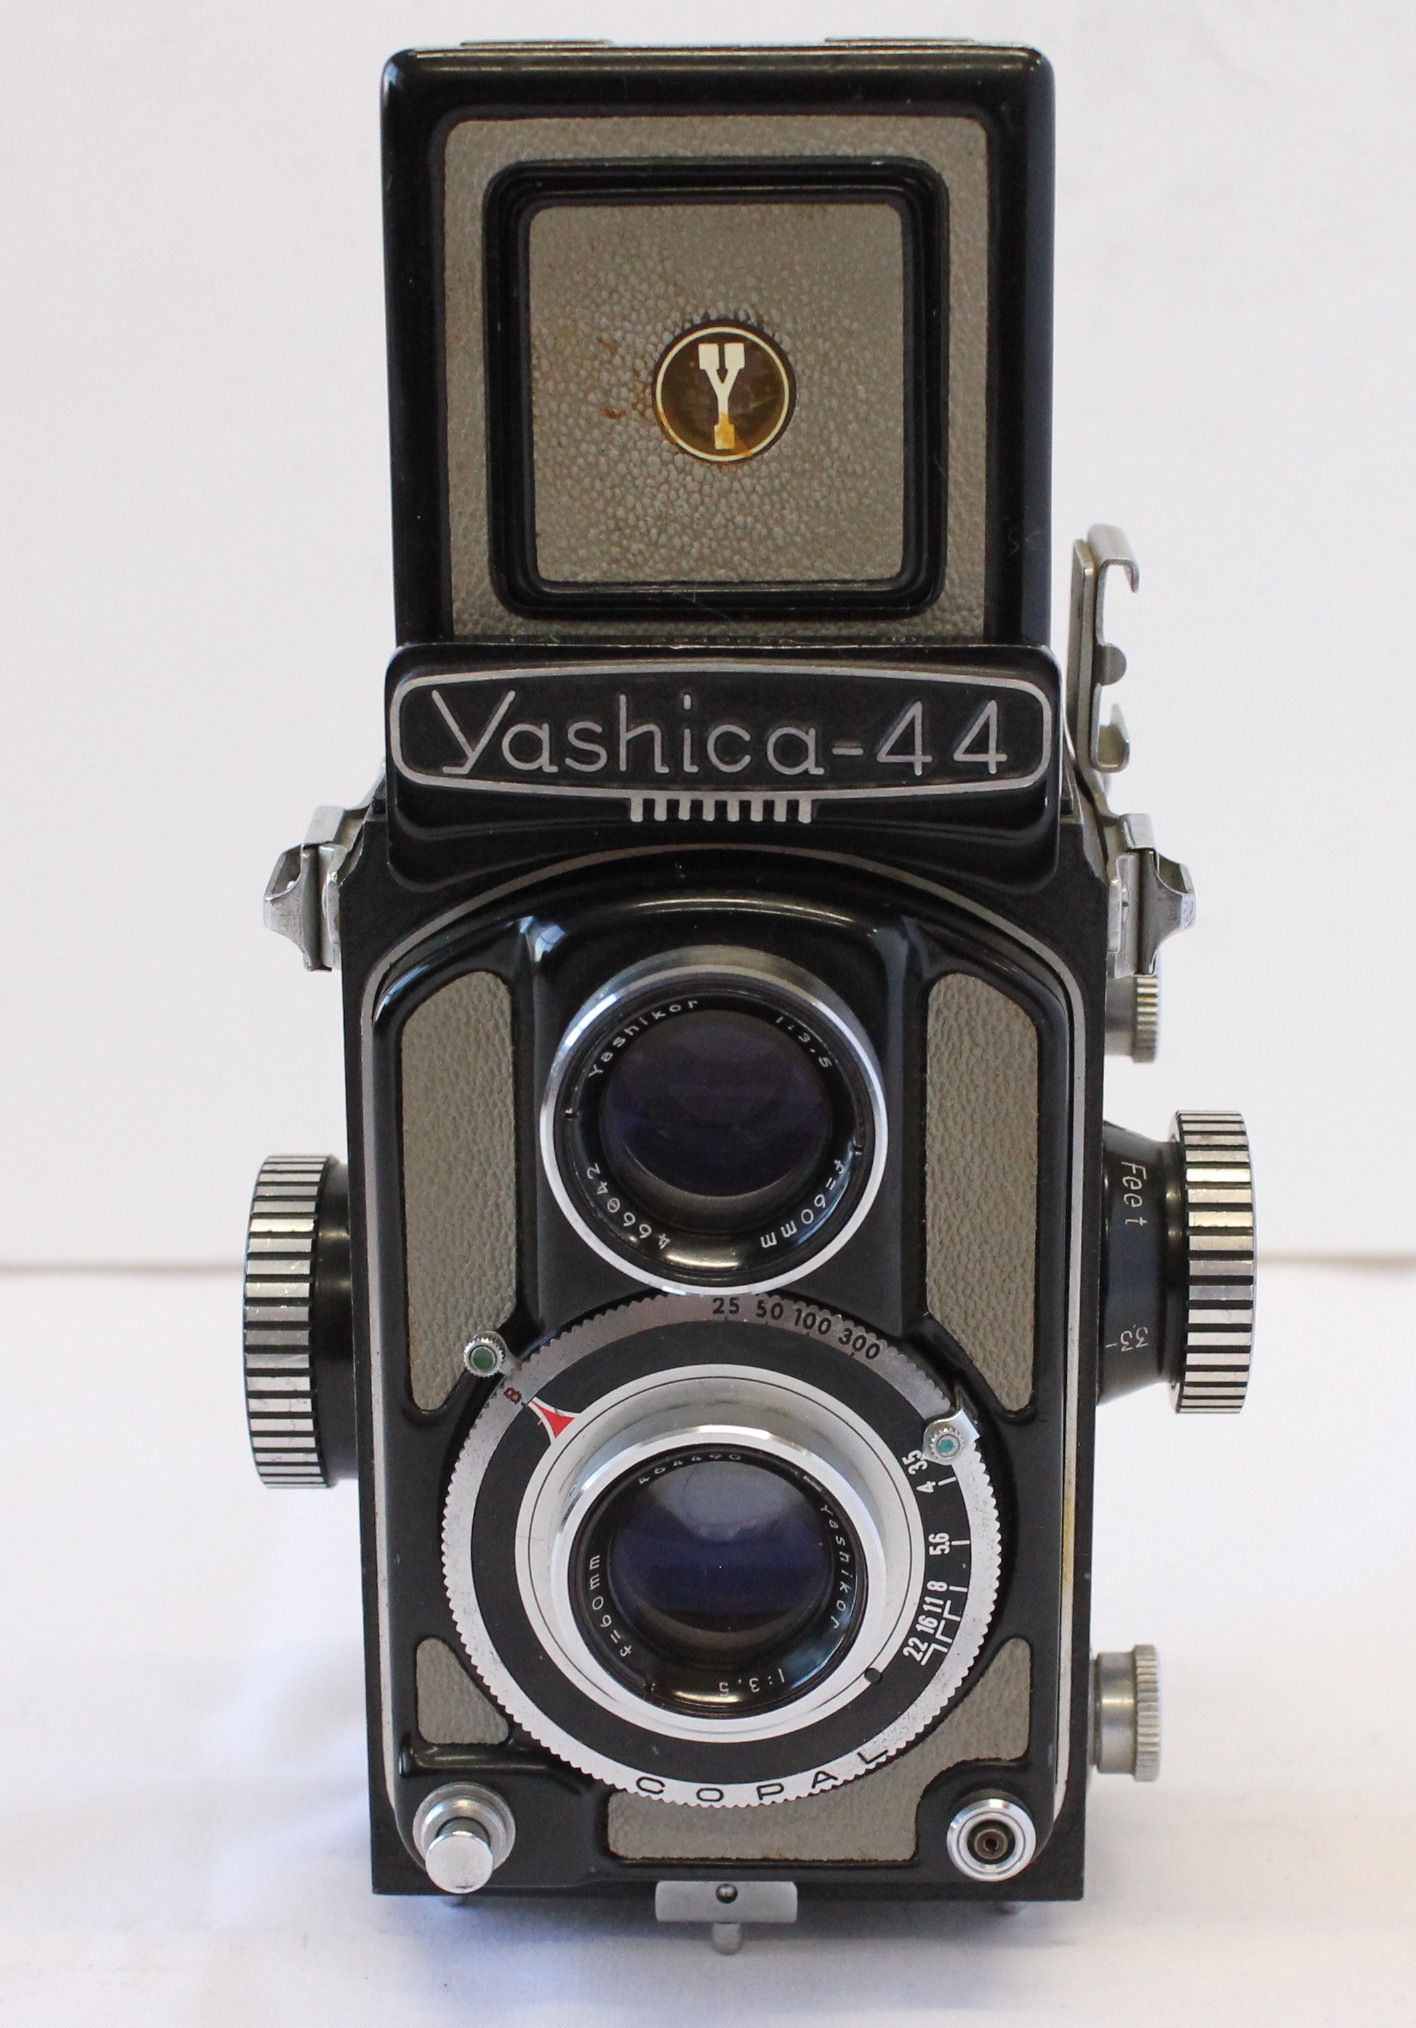   Yashica 44 A 127 4x4 TLR Camera w/ Yashikor 60mm F3.5 Lens from Japan Photo 5